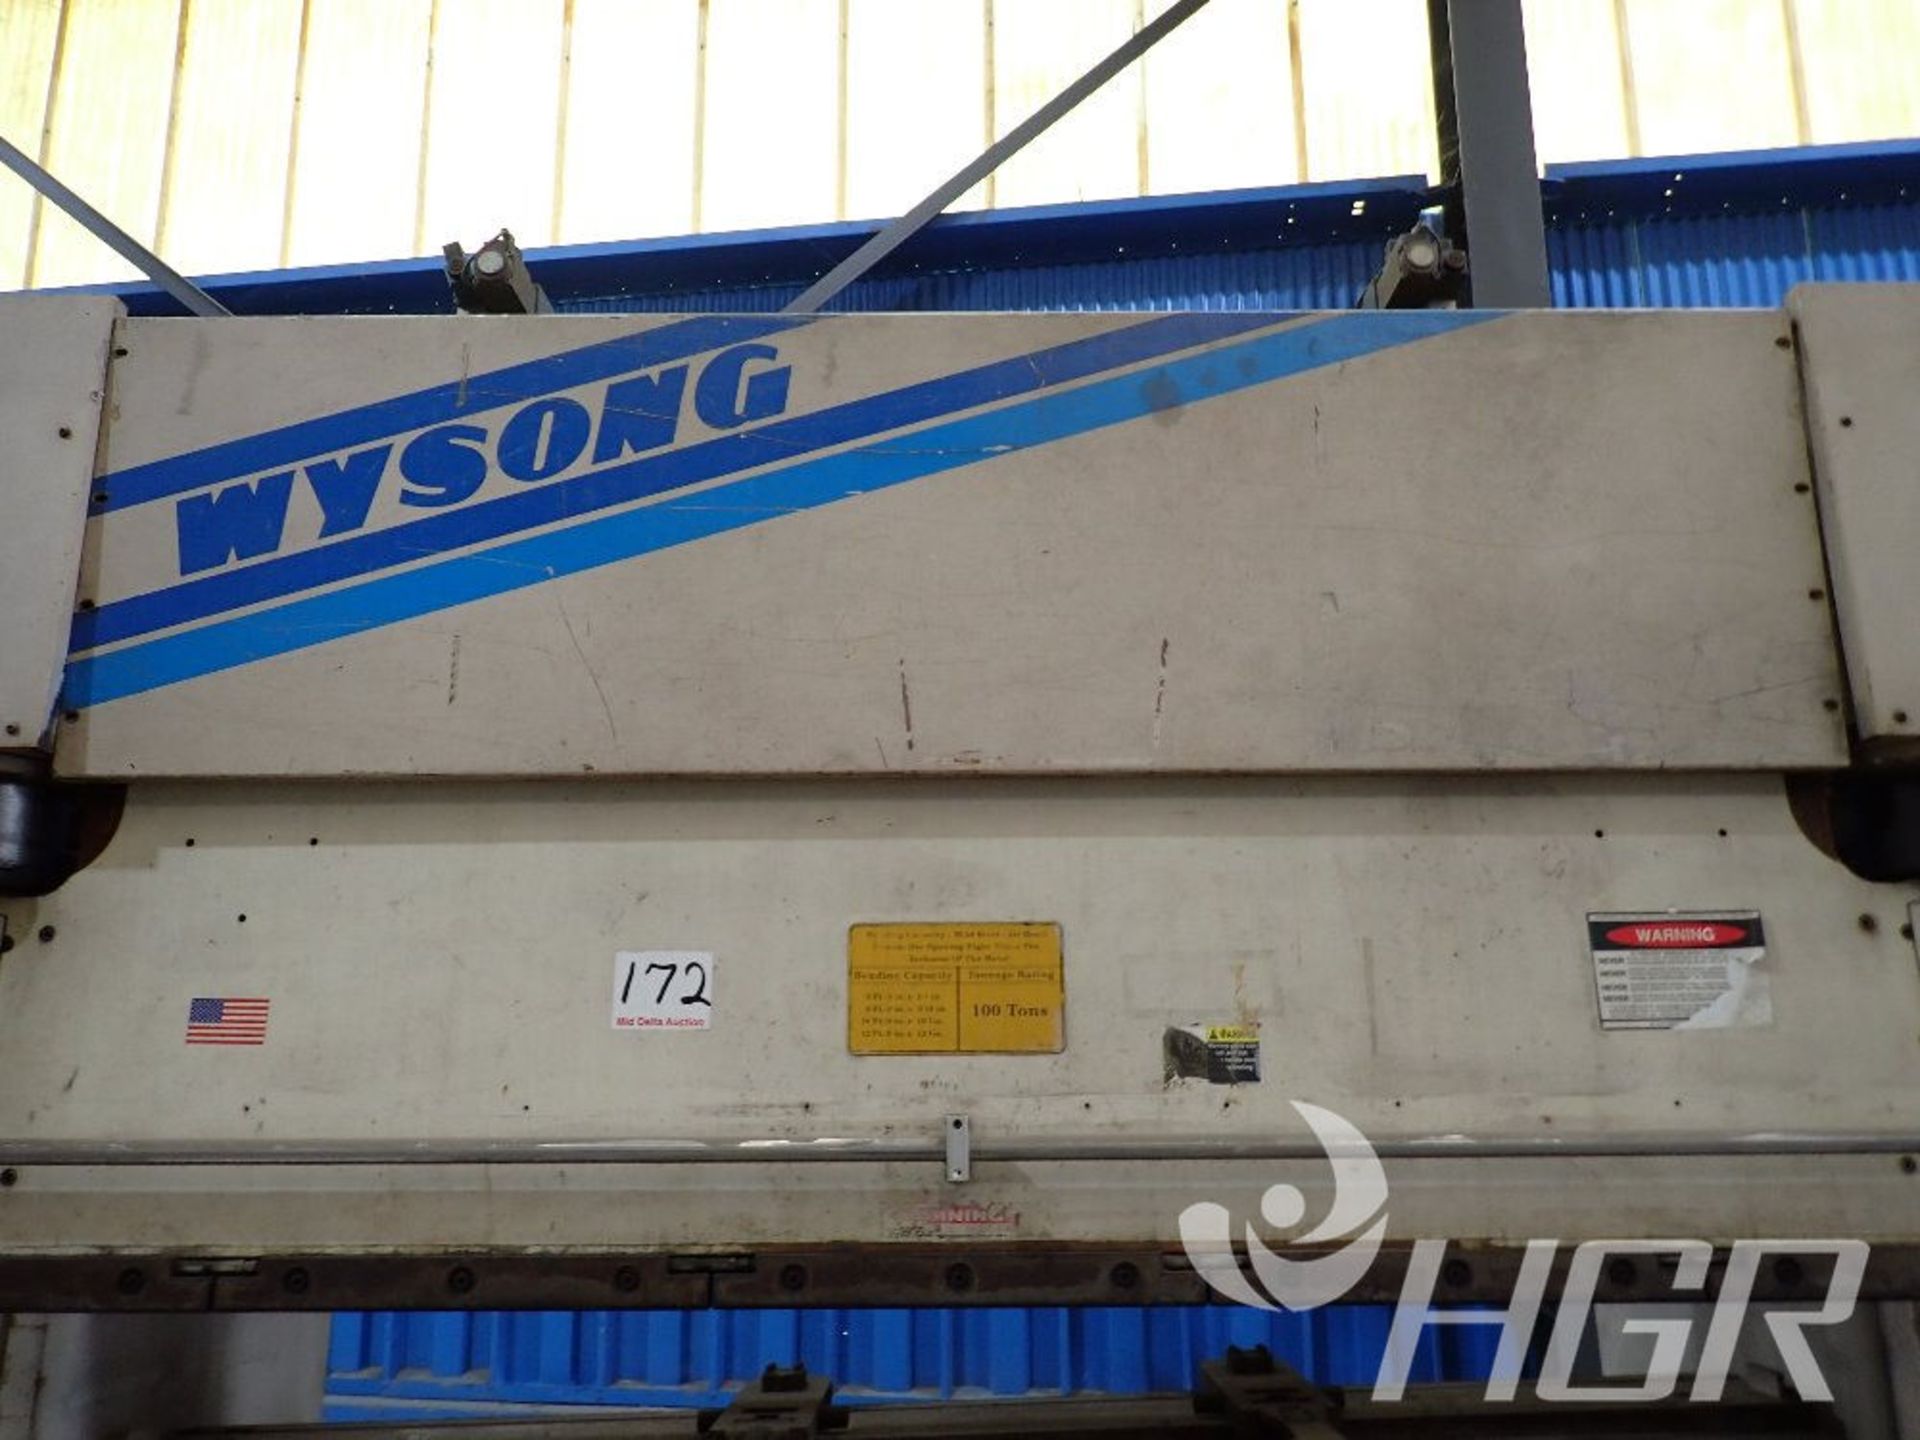 WYSONG CNC PRESS BRAKE, Model PHP100-120, Date: n/a; s/n HPB46-127-X, Approx. Capacity: 100 TON 10', - Image 22 of 25